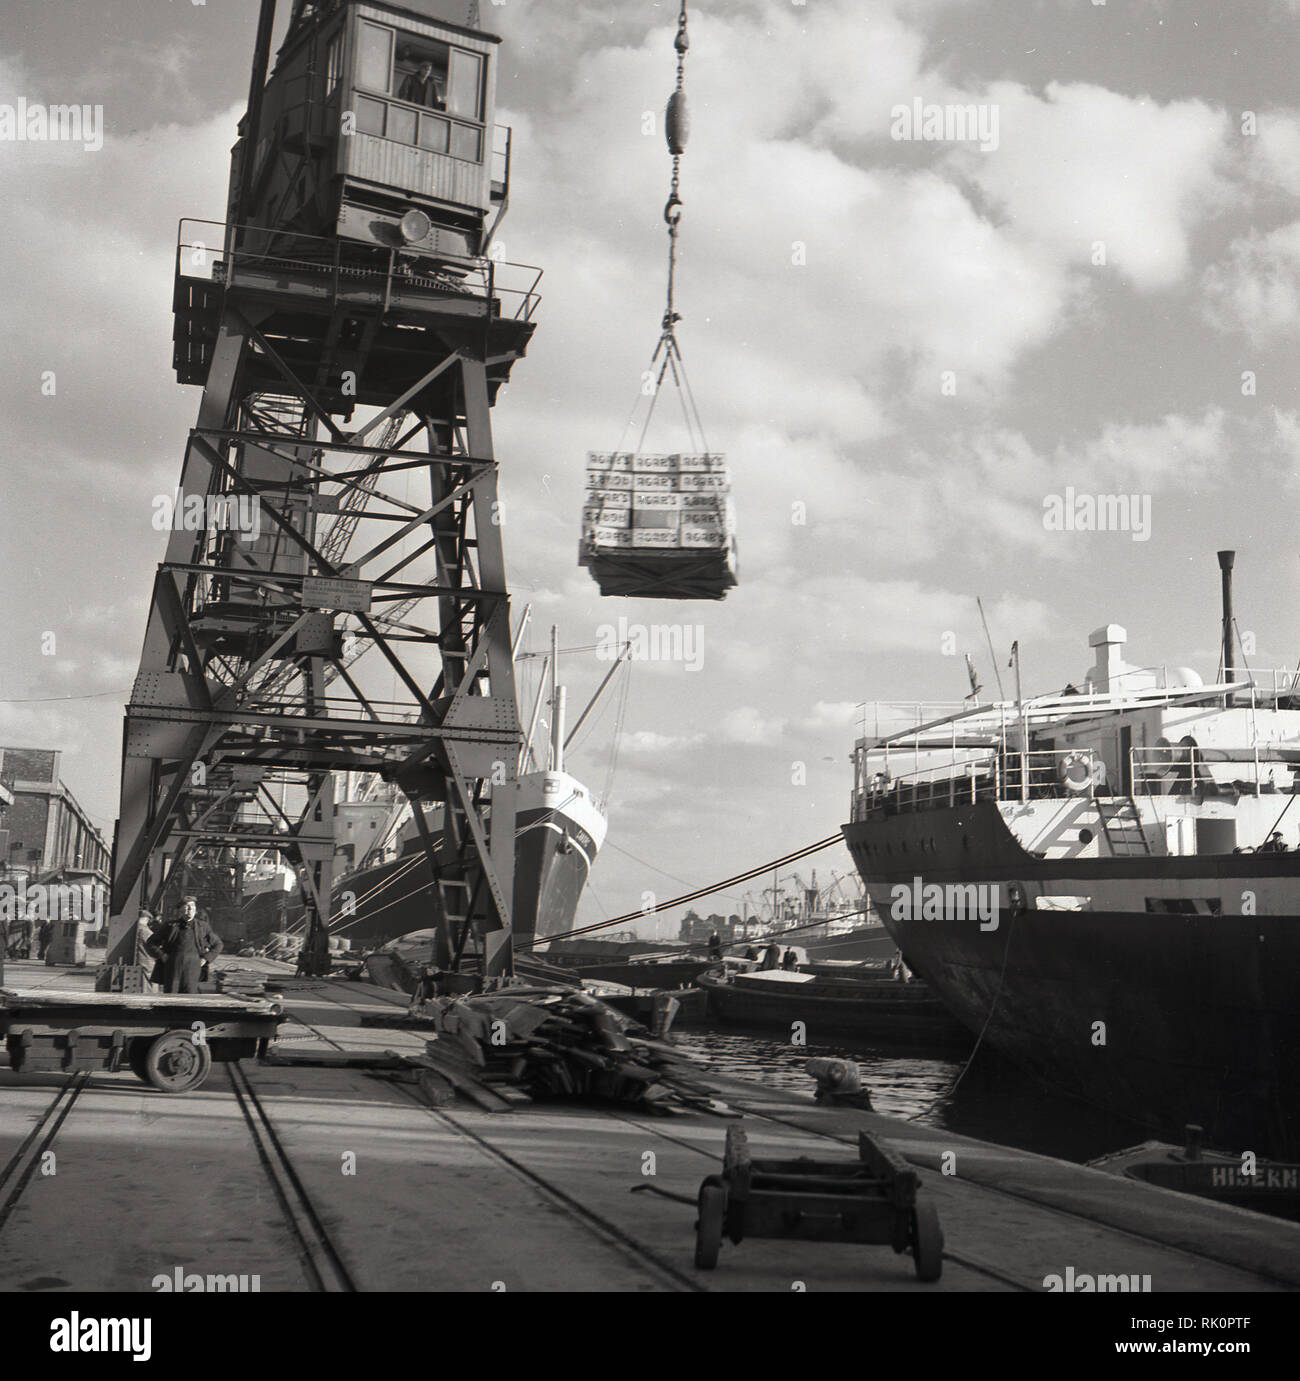 1950s, East Ferry, No 3, Isle of Dogs, London docks, a crane moving freight from ship, Agar's crates. At this time the docklands of London were working industrial places but declined from the 1960s onwards, as the larger ships could not be accomodated in the narrow waterways. Stock Photo